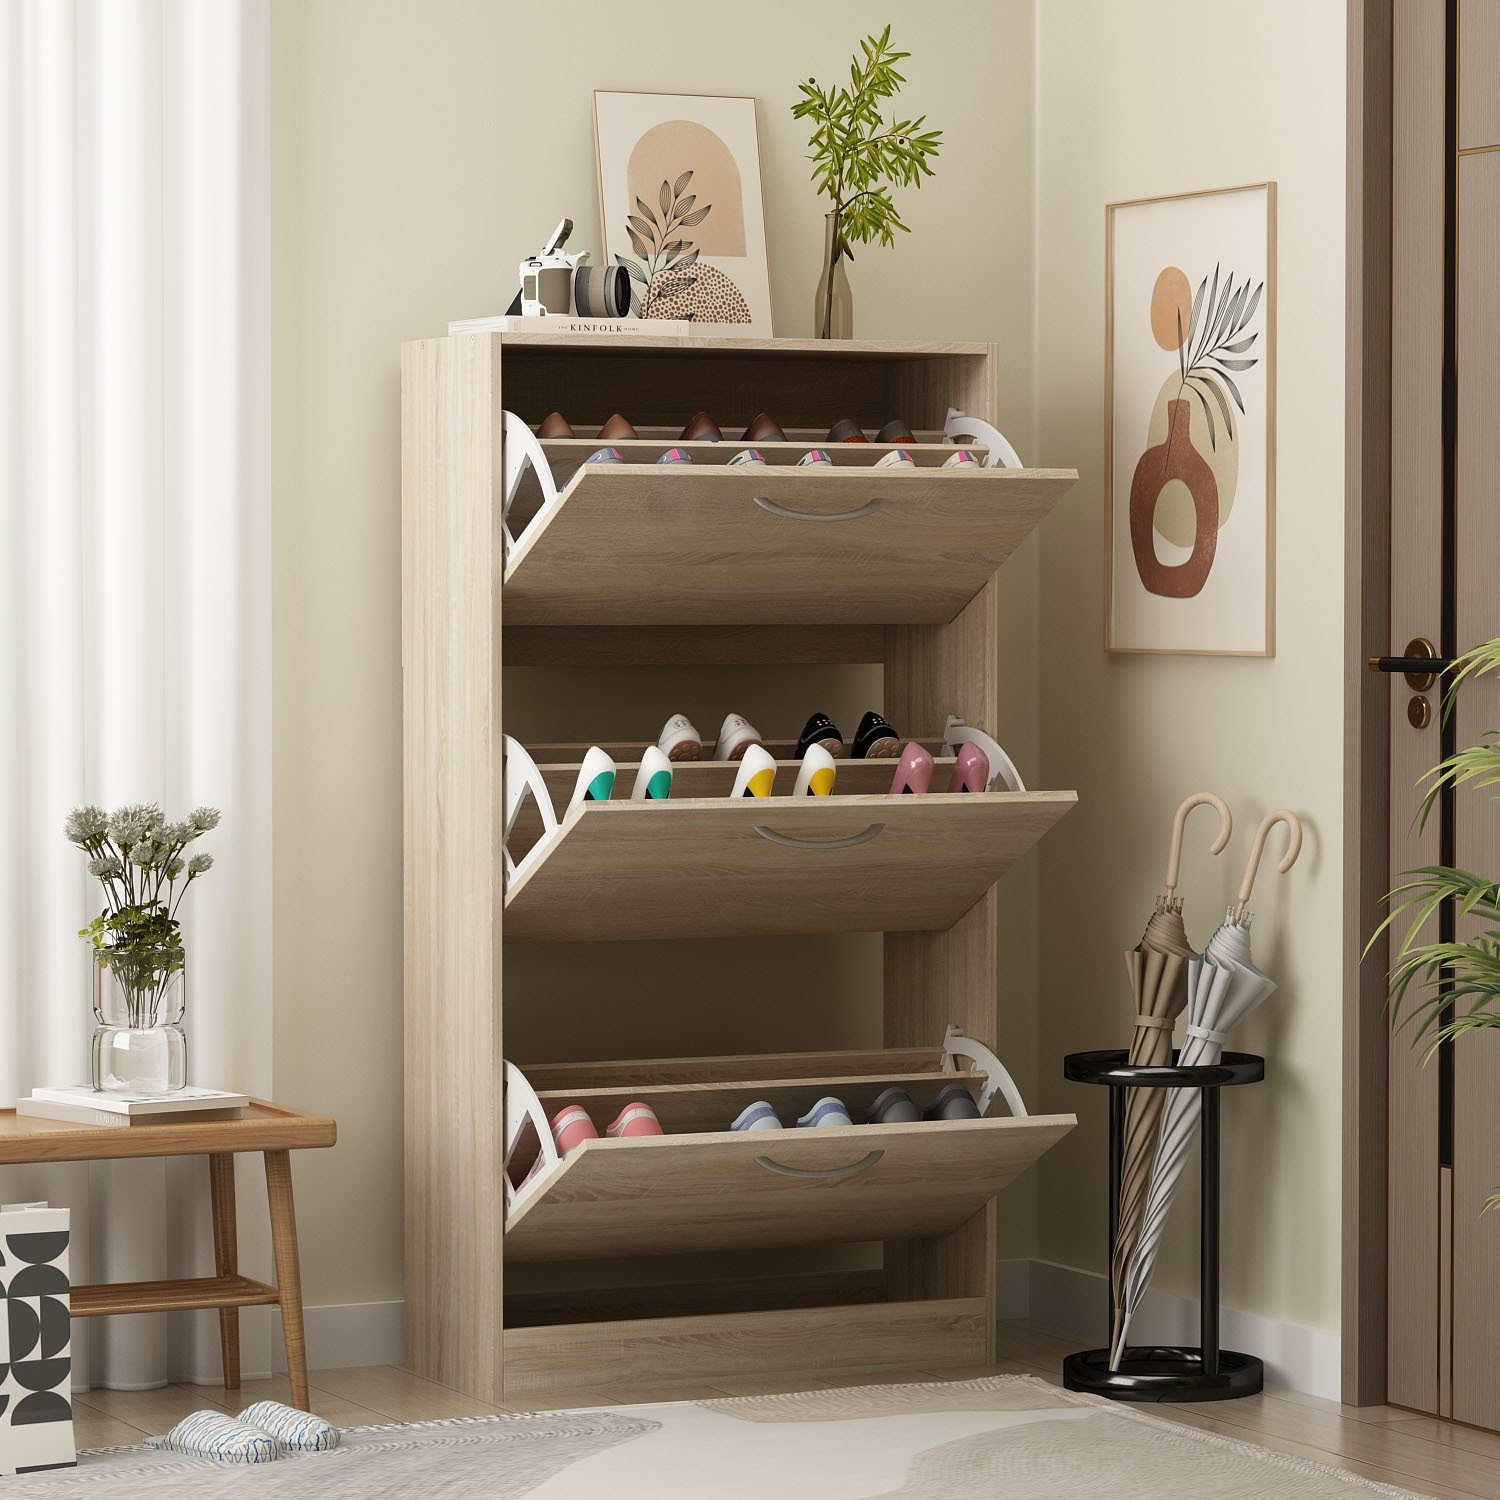 https://ak1.ostkcdn.com/images/products/is/images/direct/4f61d7eb07698e2c2e10751c73426a1f1ed64212/Modern-Shoe-Storage-Cabinet-for-Entryway%2C-2-Tier-Floor-Shoes-Cabinet.jpg